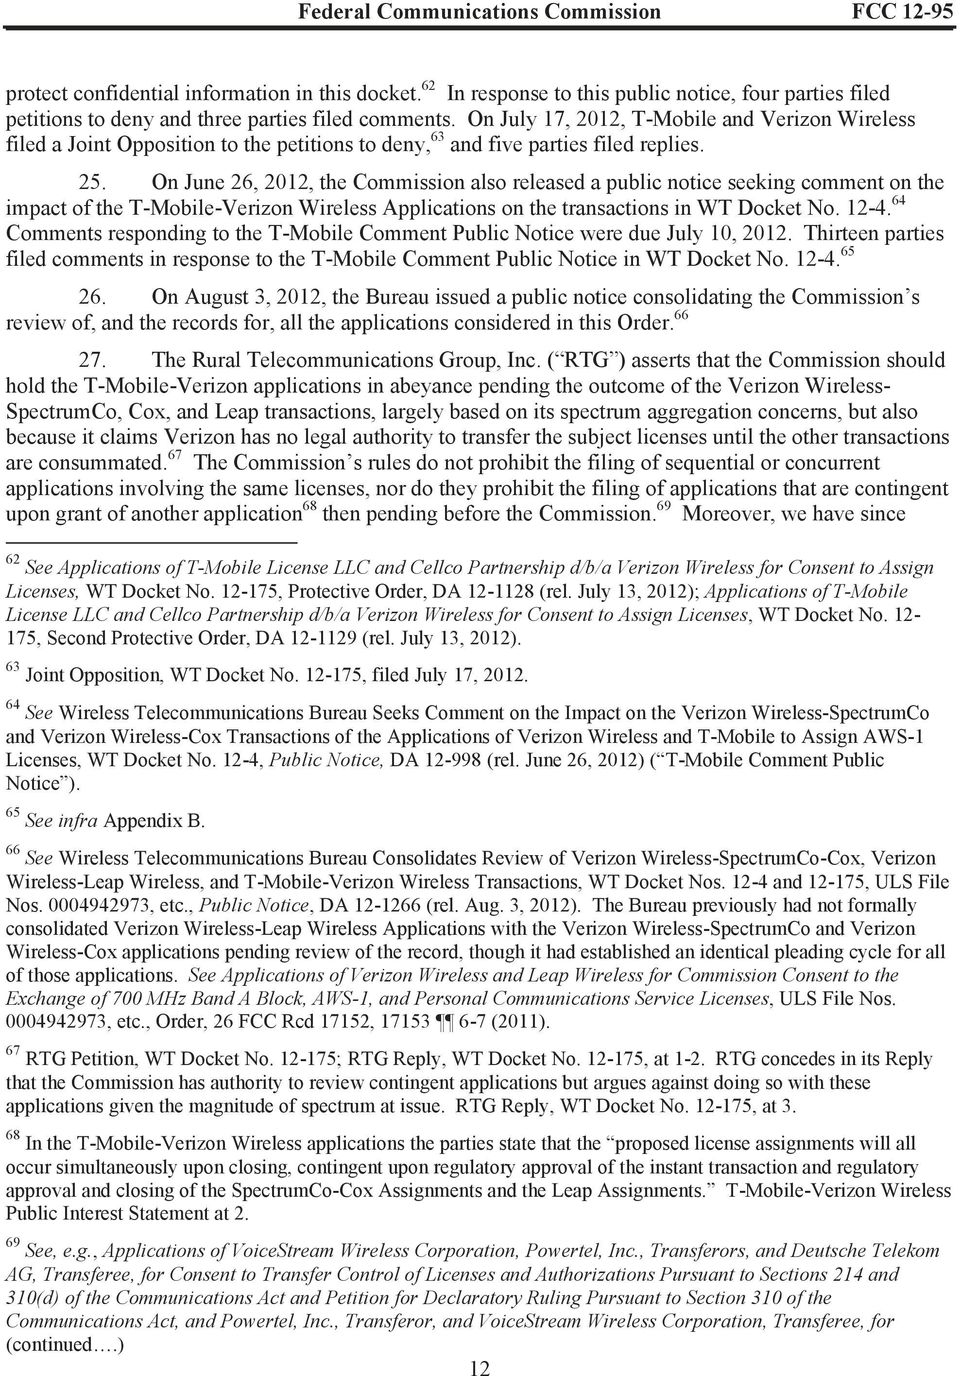 On June 26, 2012, the Commission also released a public notice seeking comment on the impact of the T-Mobile-Verizon Wireless Applications on the transactions in WT Docket No. 12-4.